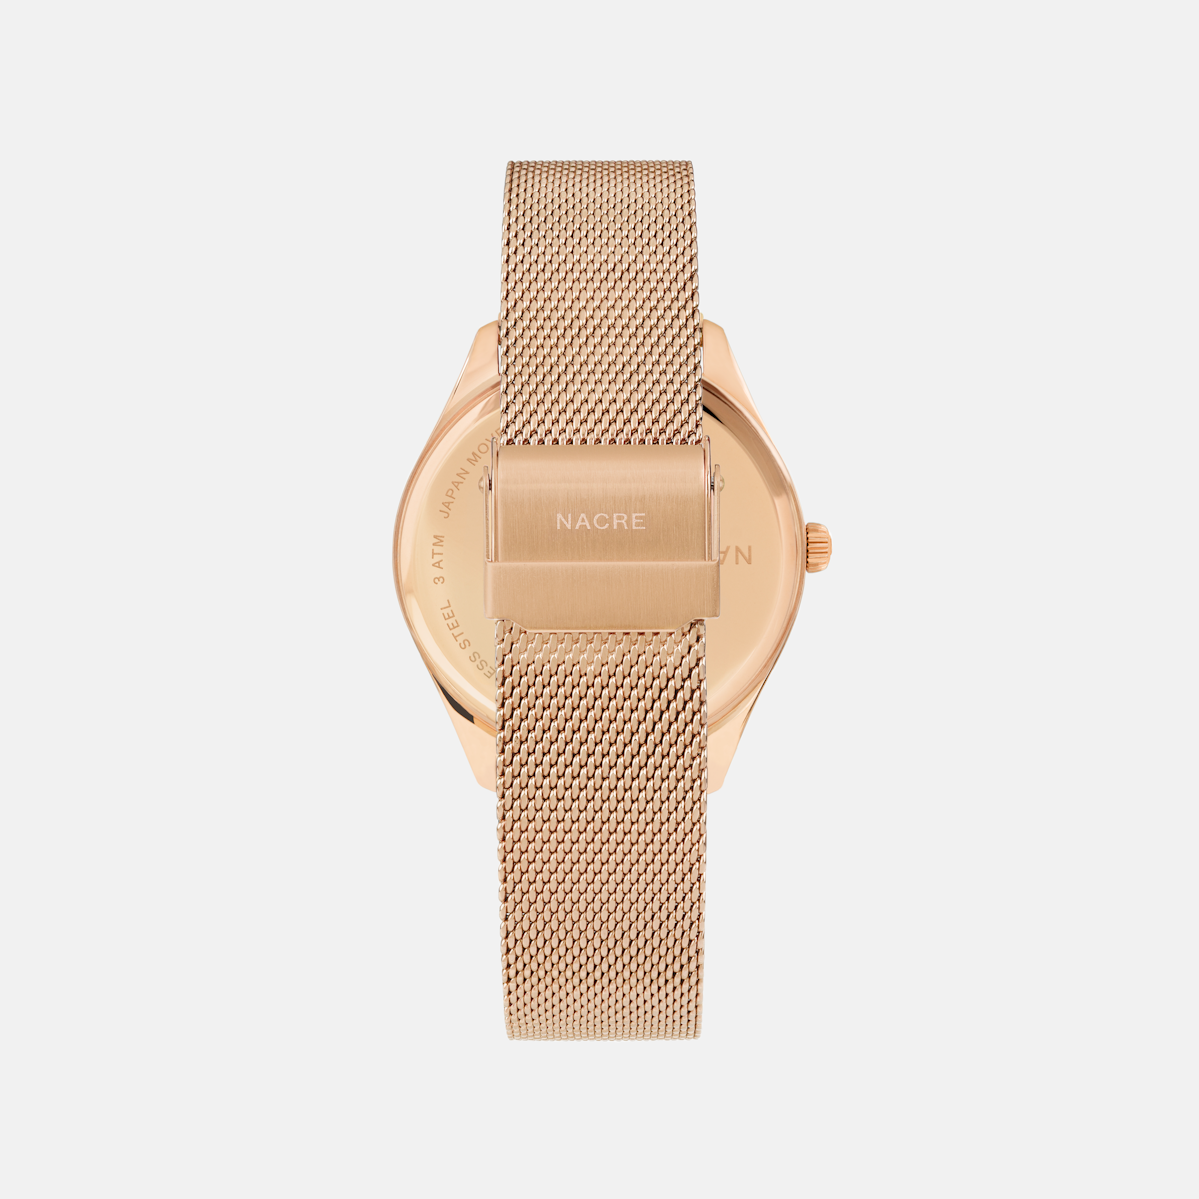 Lune 8 - Rose Gold and White - Natural Leather